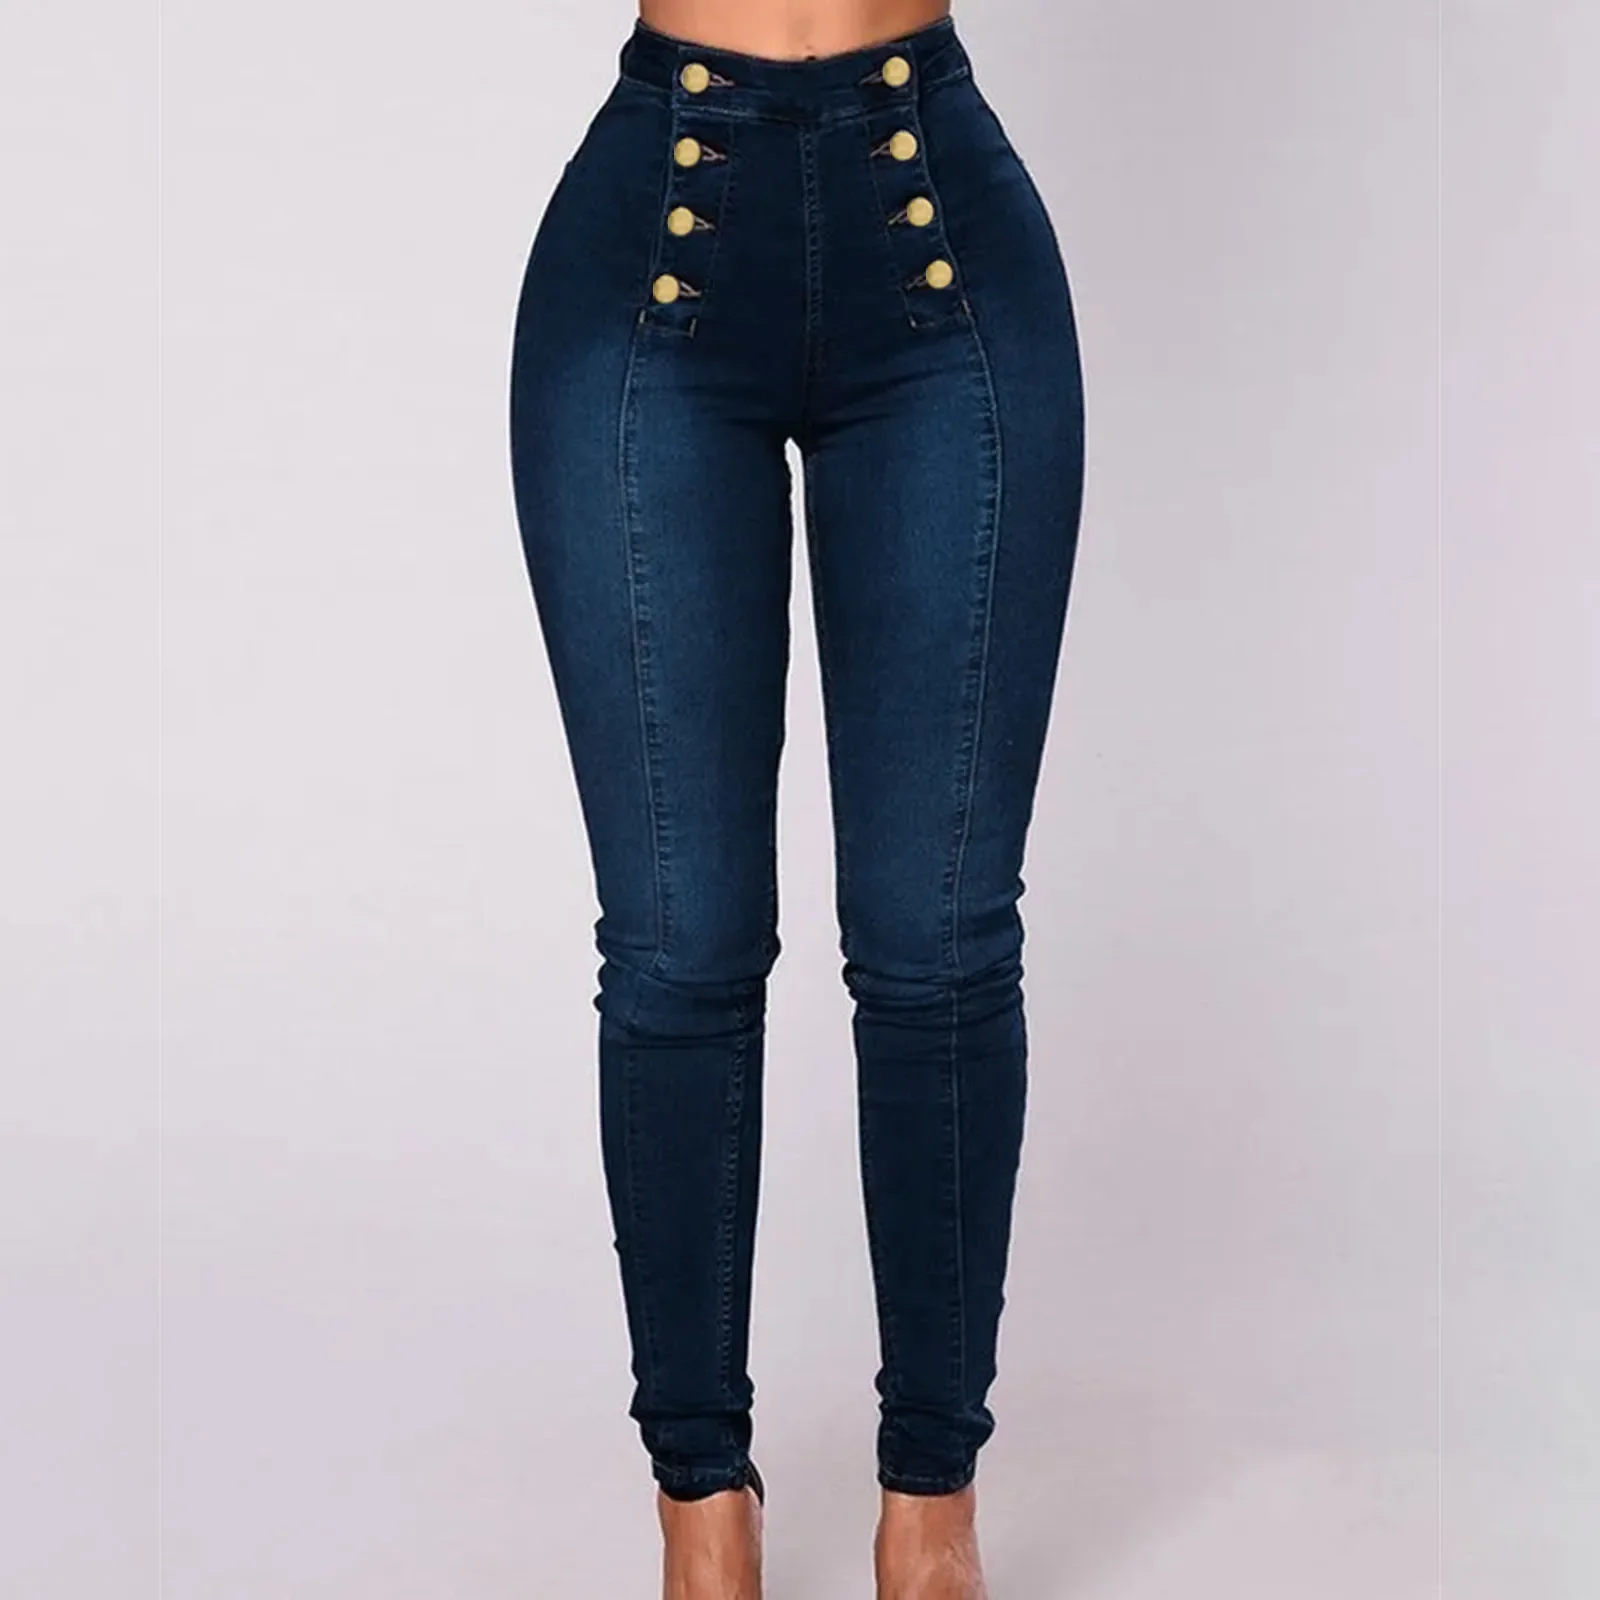 Denim Trousers Elastic High Waist Casual Jeans Trendy Double Breasted Multi Button Slim Skinny Jeans Ankle-Length Denim Pants thin rayon wide leg jean baggy women straight denim pant ankle length trousers elastic high waist capris korean fashion vaqueros